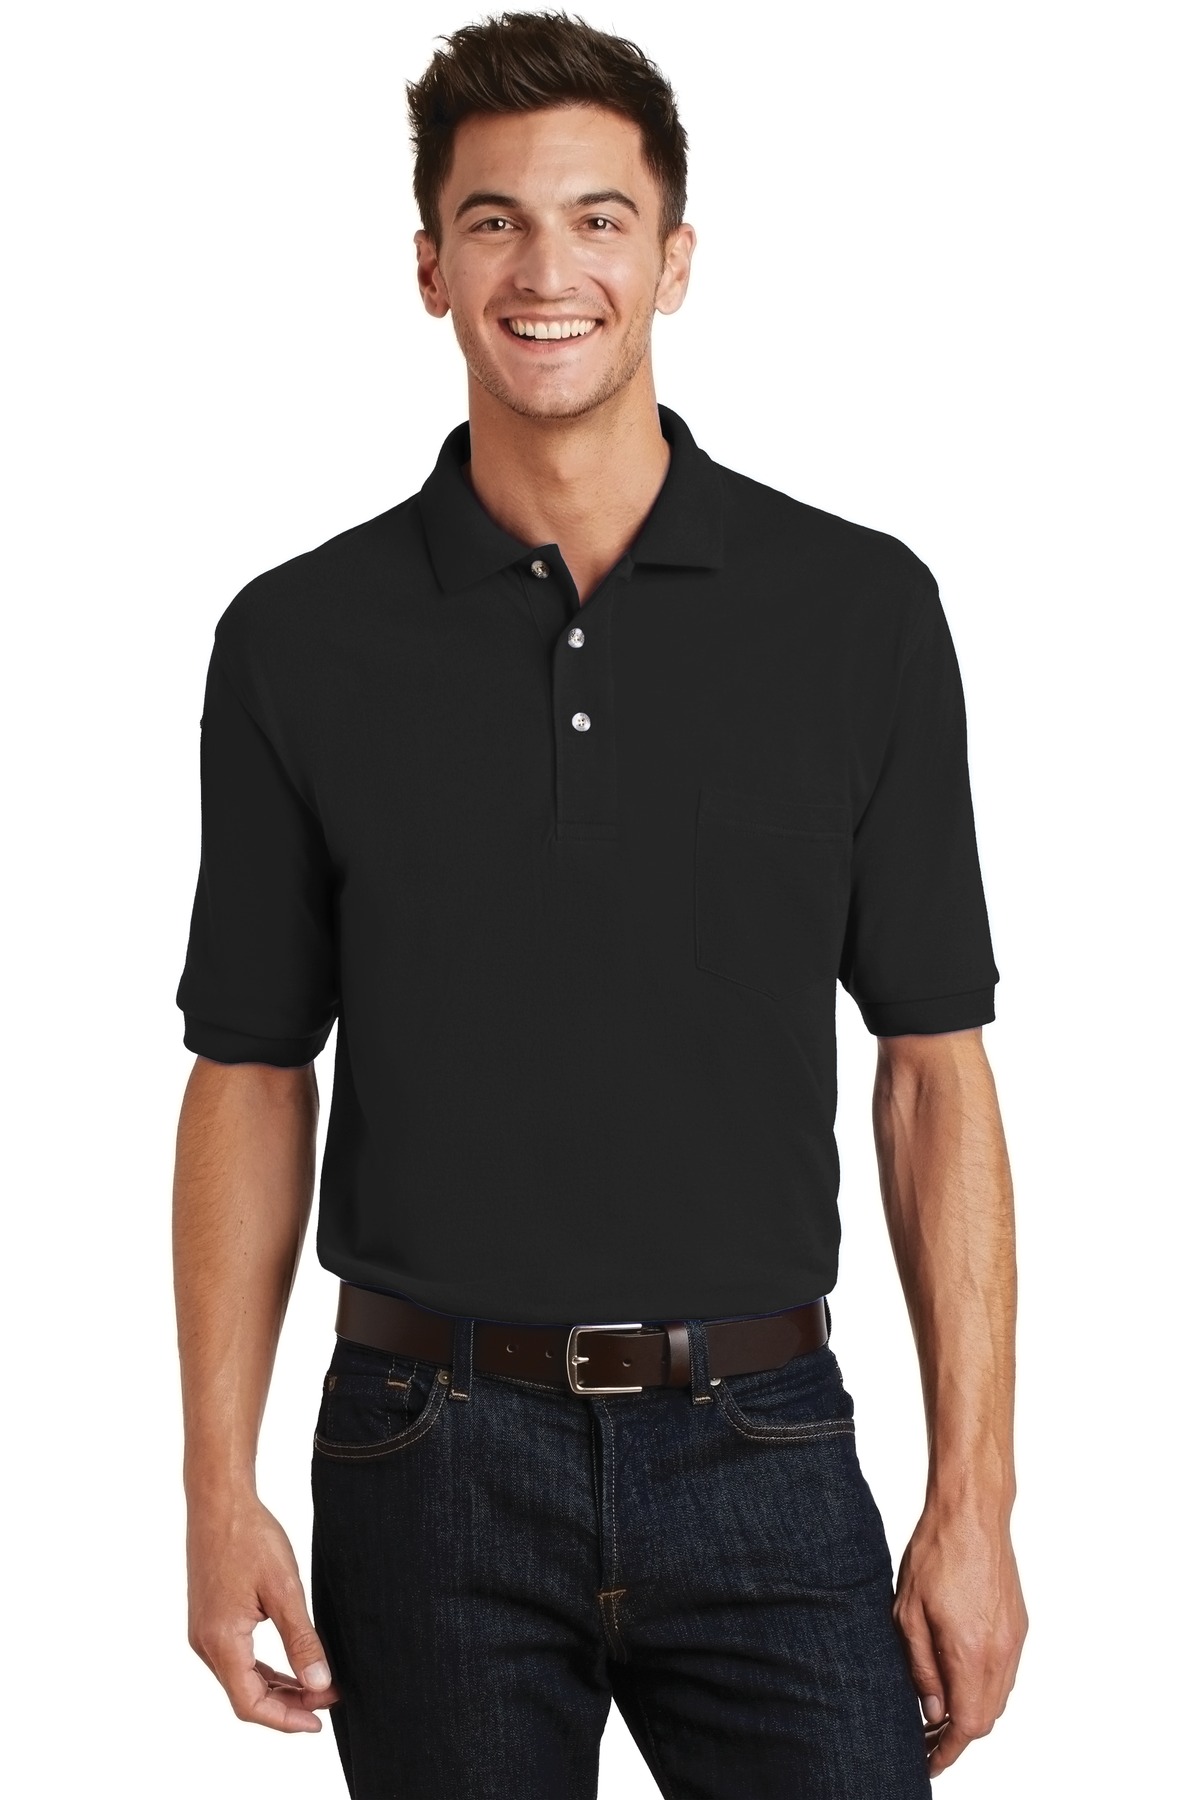 Port Authority Hospitality Polos & Knits ® Heavyweight Cotton Pique Polo with Pocket.-Port Authority